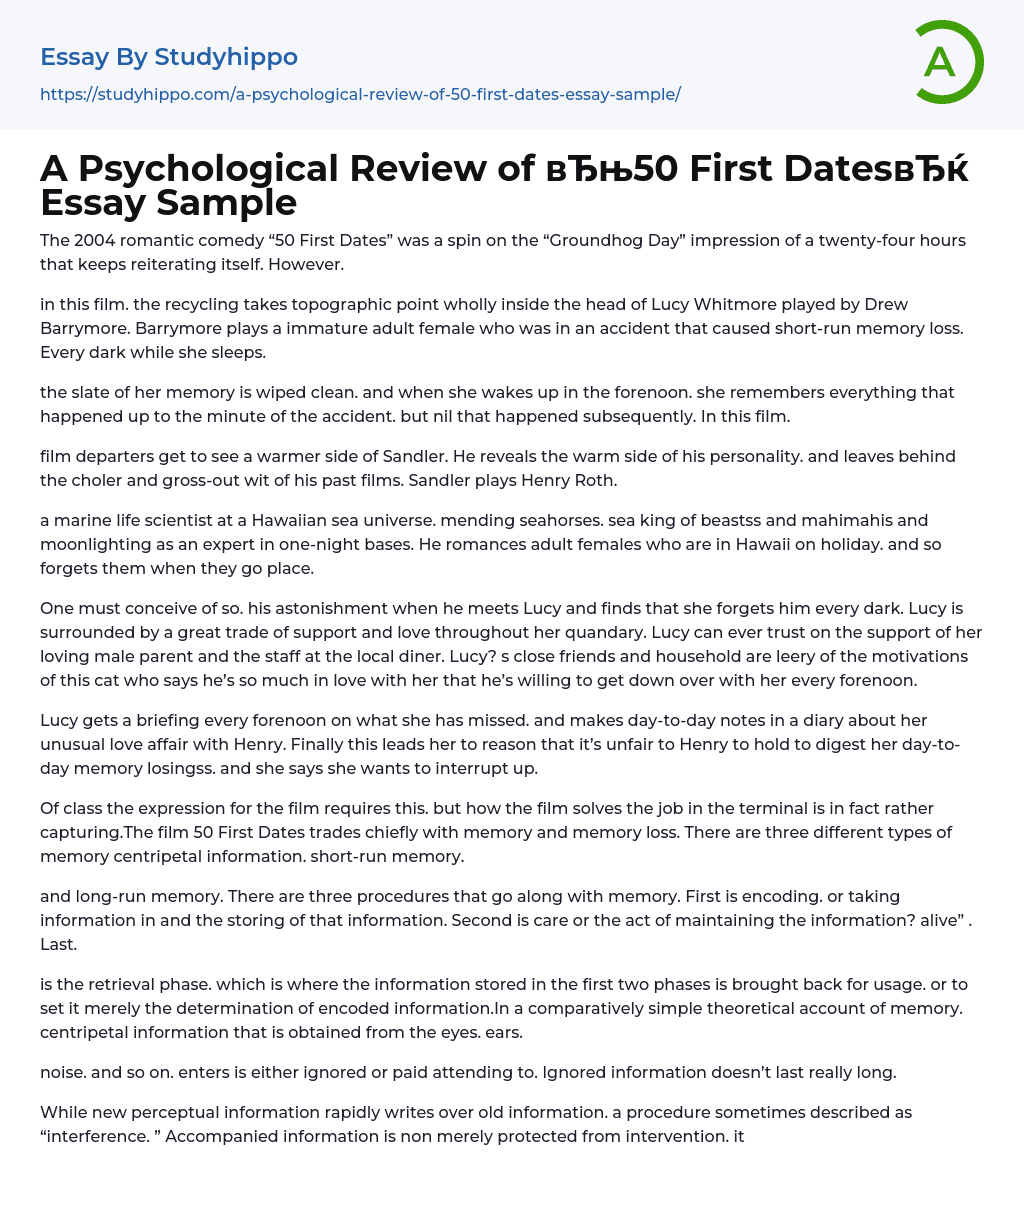 A Psychological Review of “50 First Dates” Essay Sample